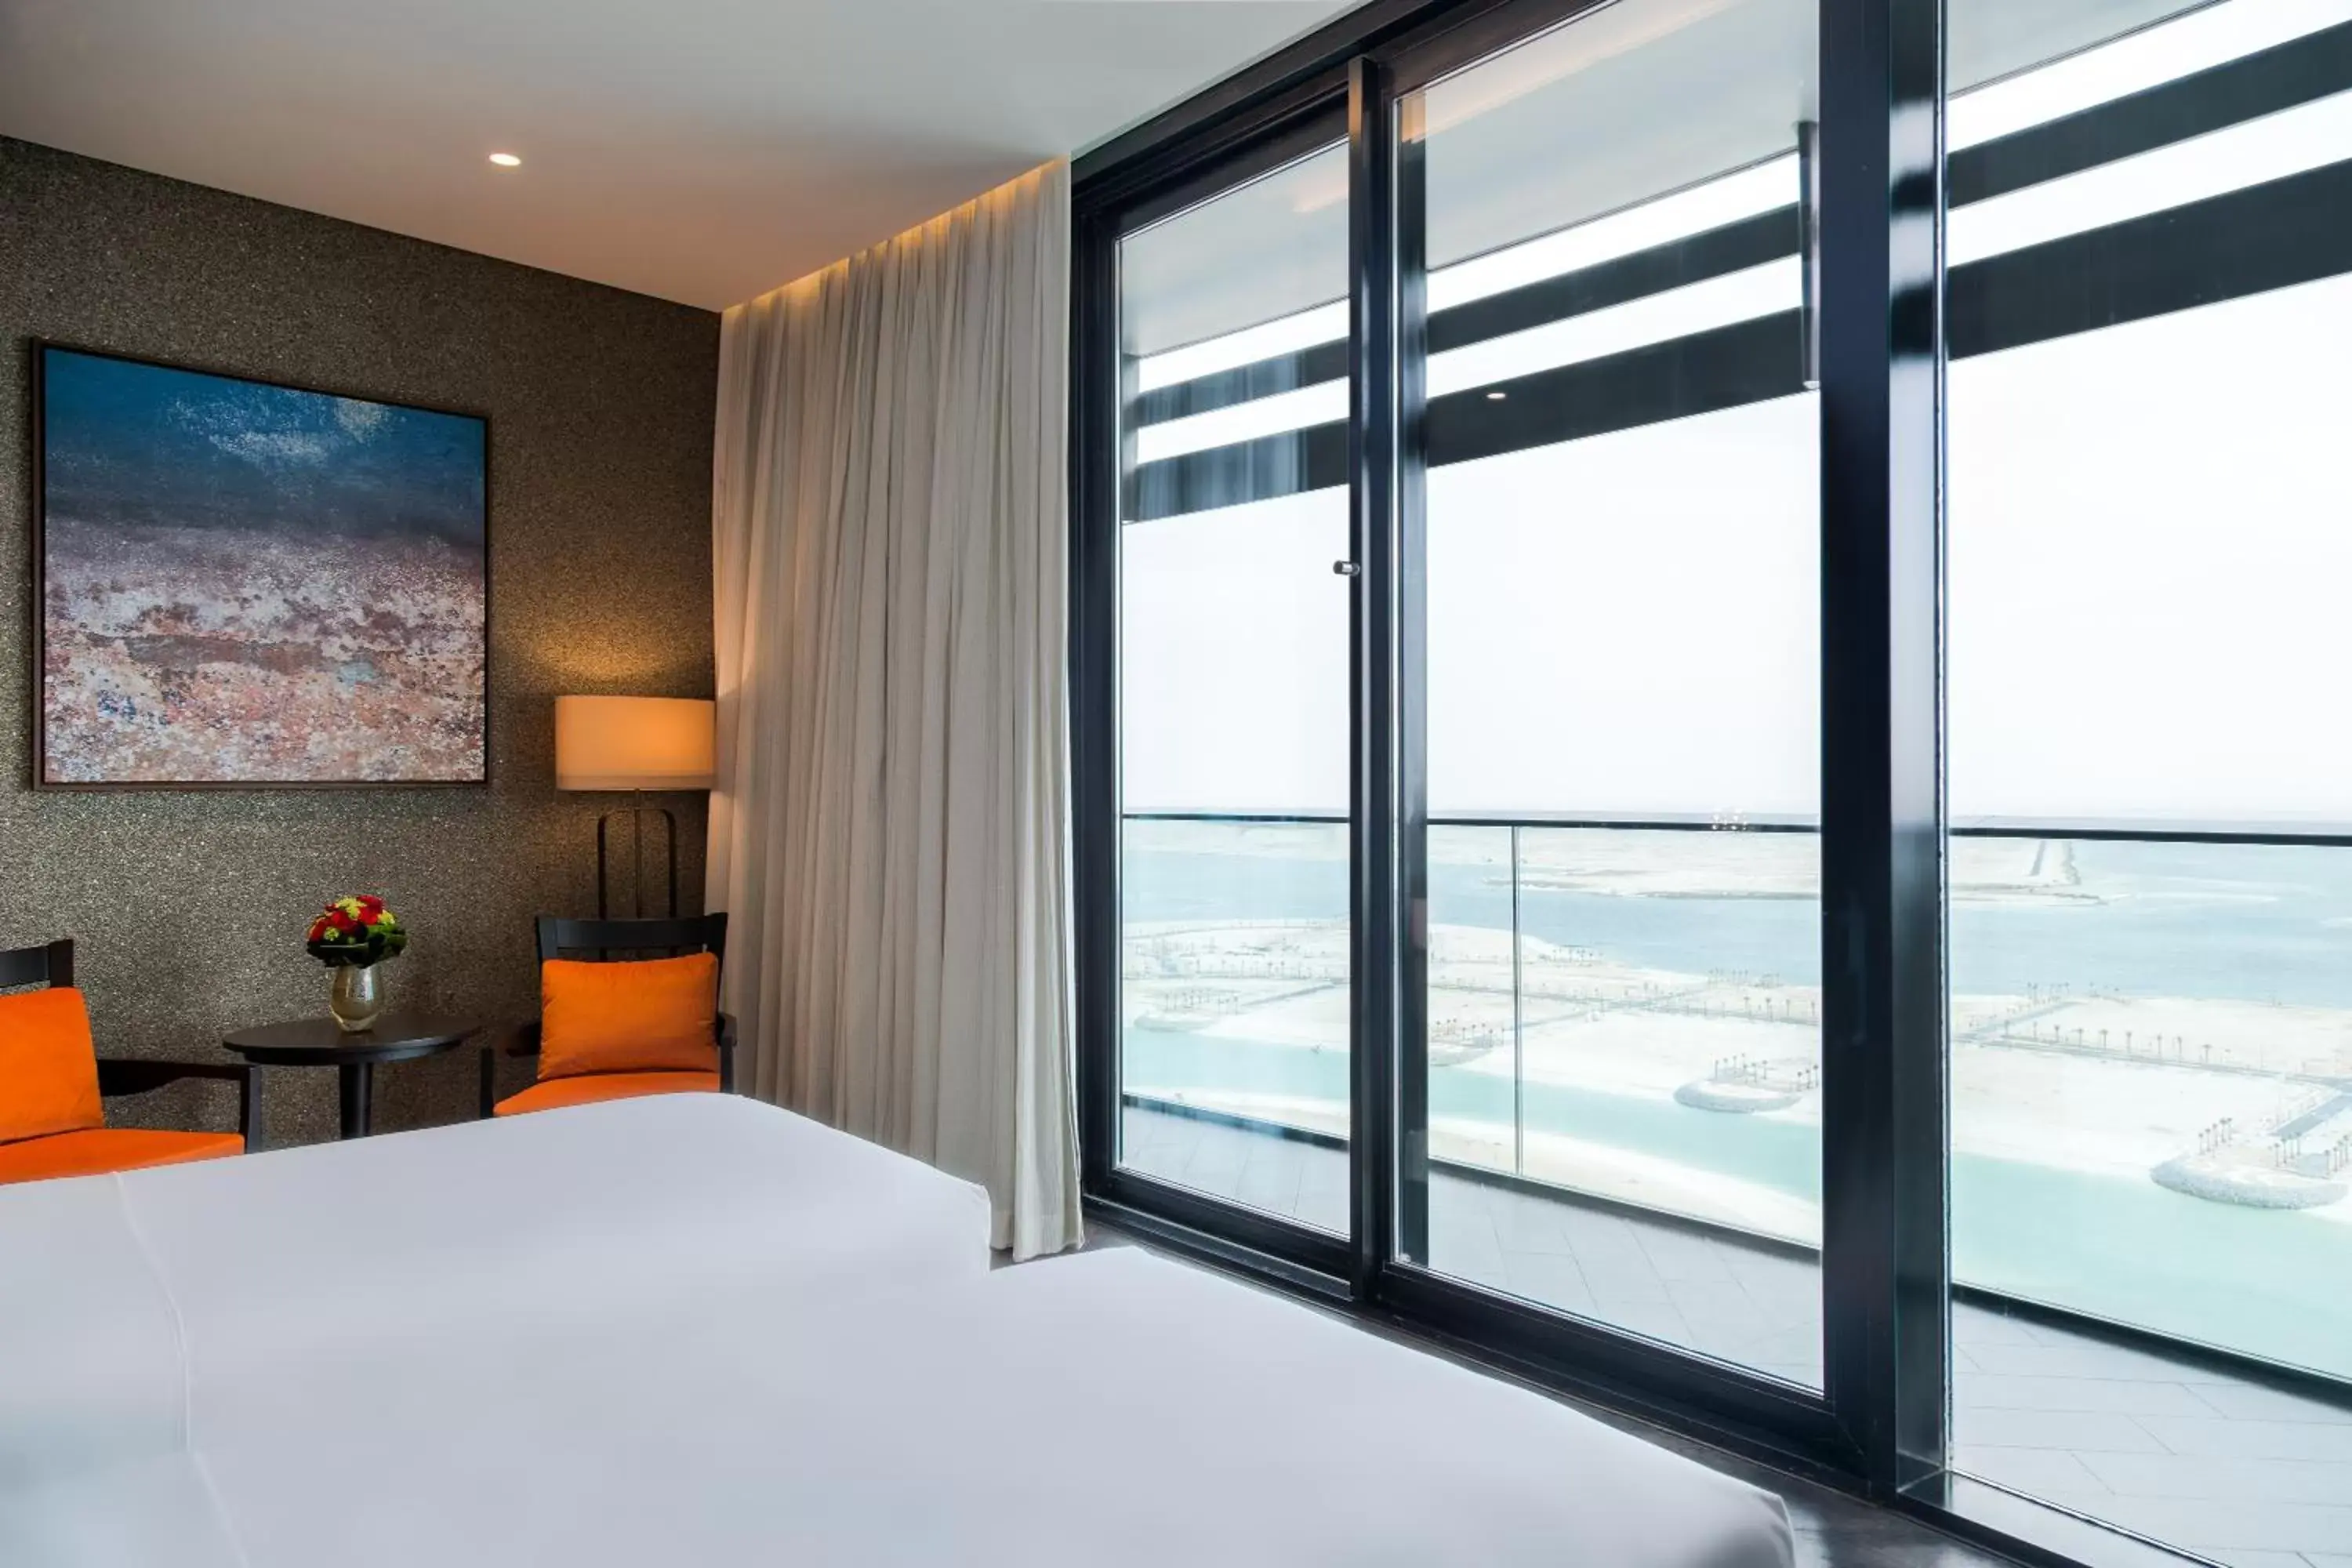 Twin Room with Balcony and View in Grand Hyatt Abu Dhabi Hotel & Residences Emirates Pearl